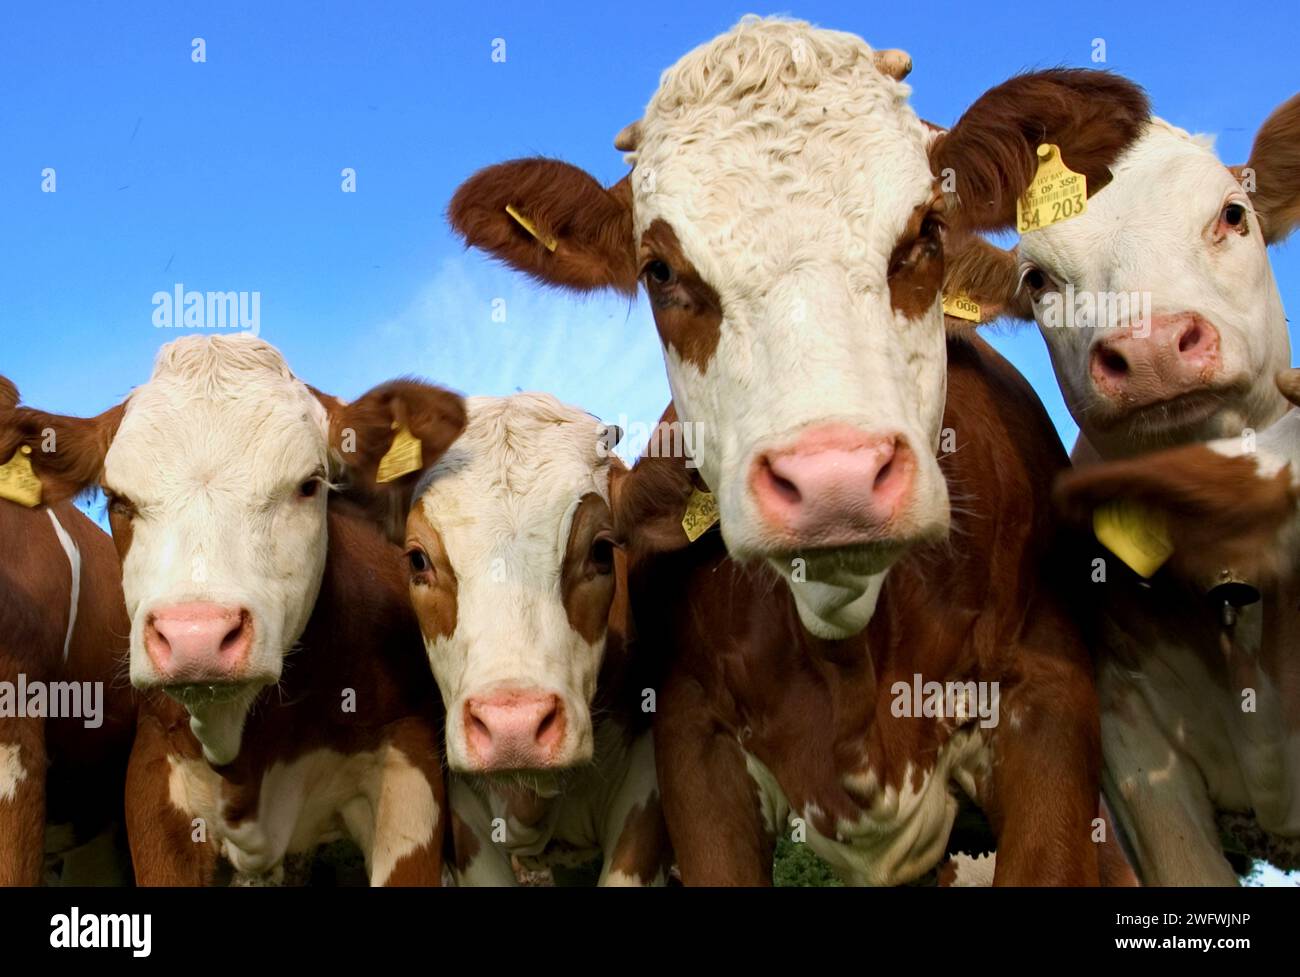 curious cows are interested in the photographer Stock Photo